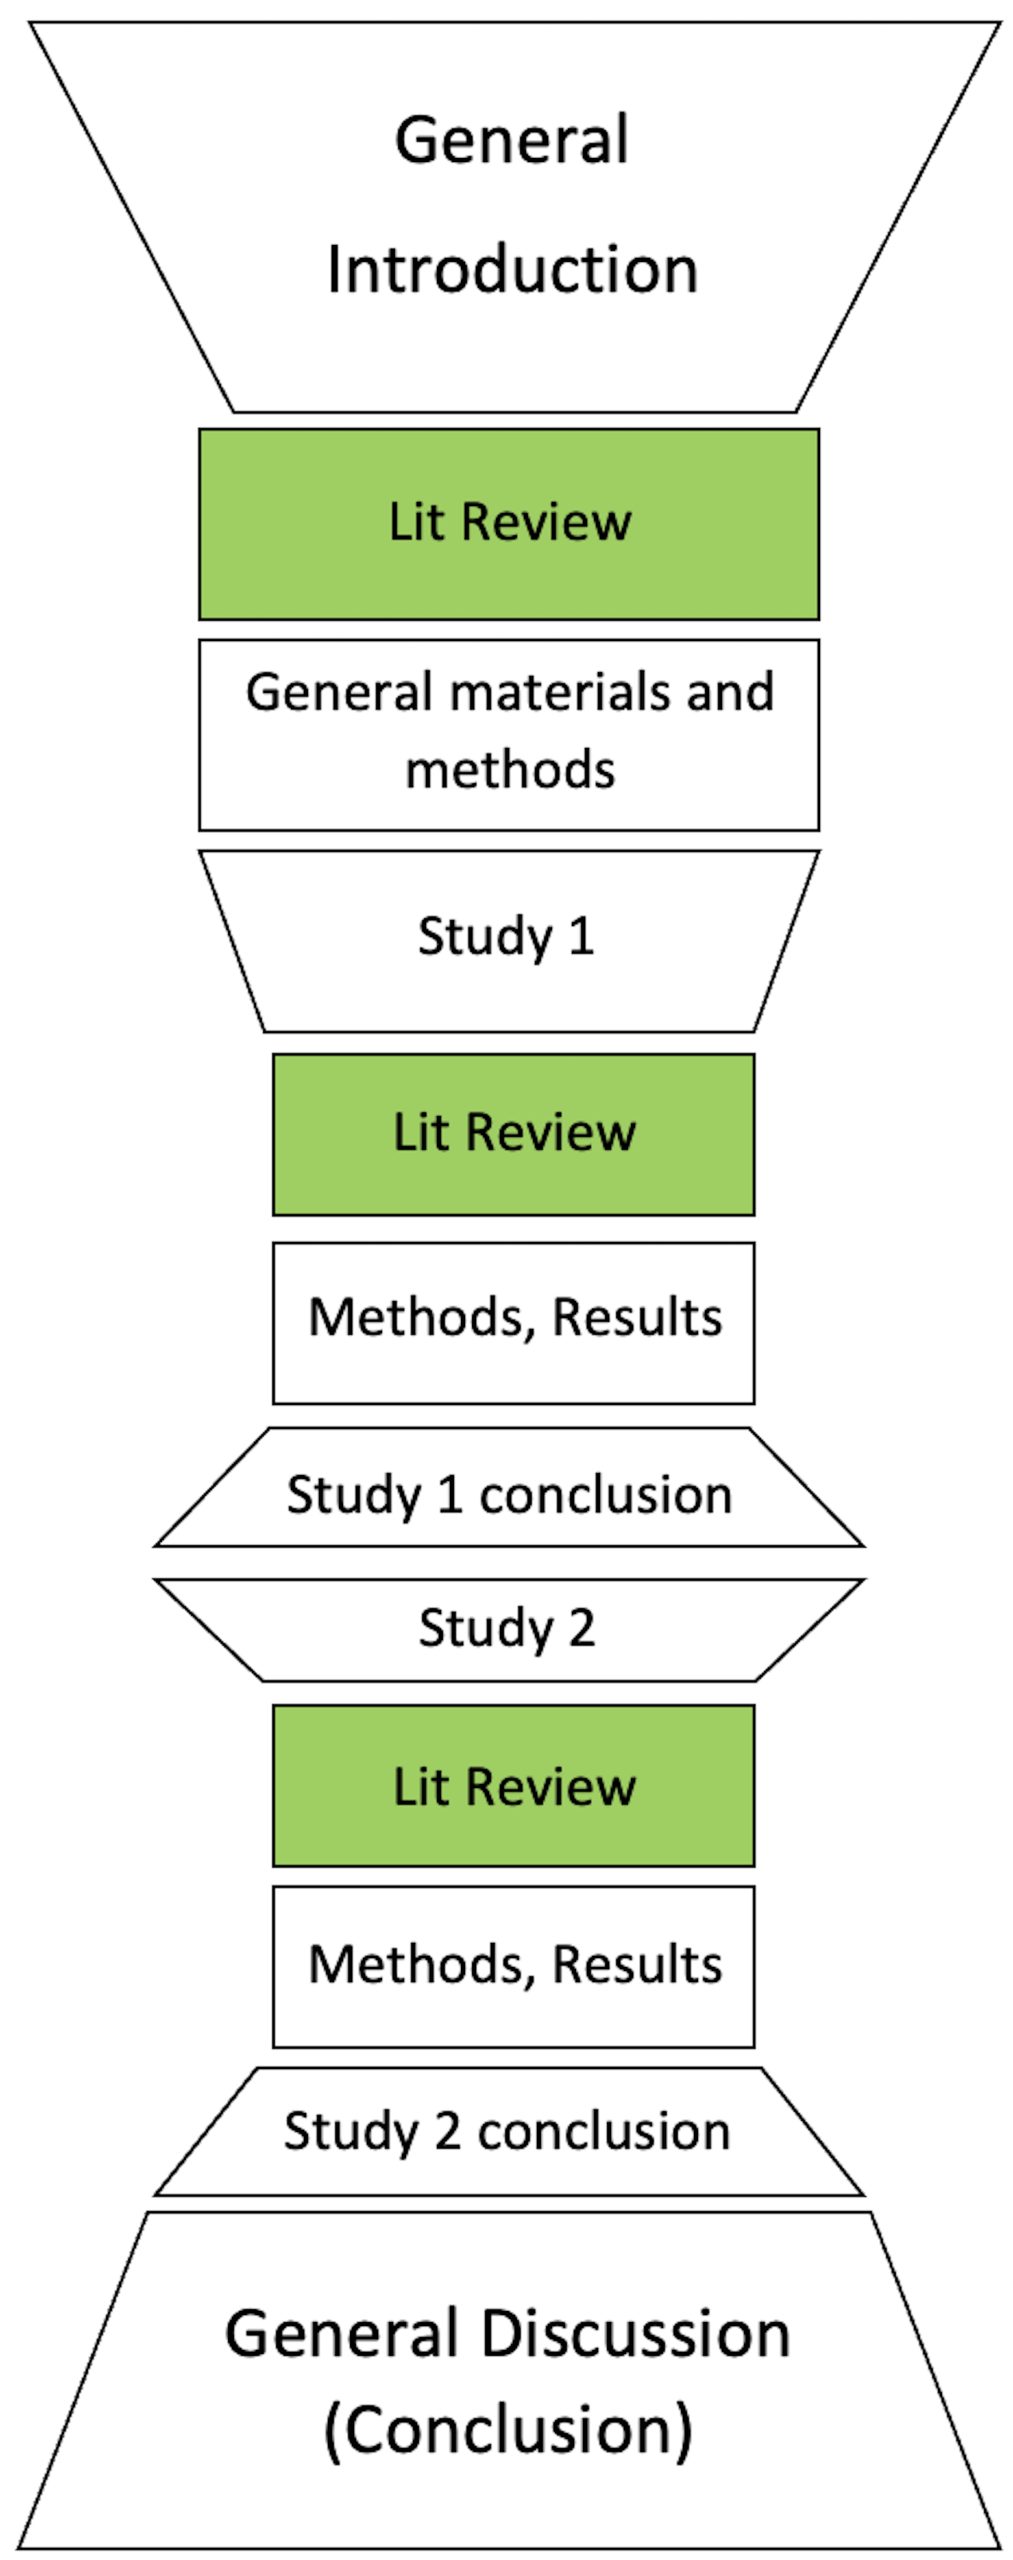 Graphic shows a complex IMRAD thesis structure, where there is a general literature review, and then a literature review belonging to each individual study within the thesis.